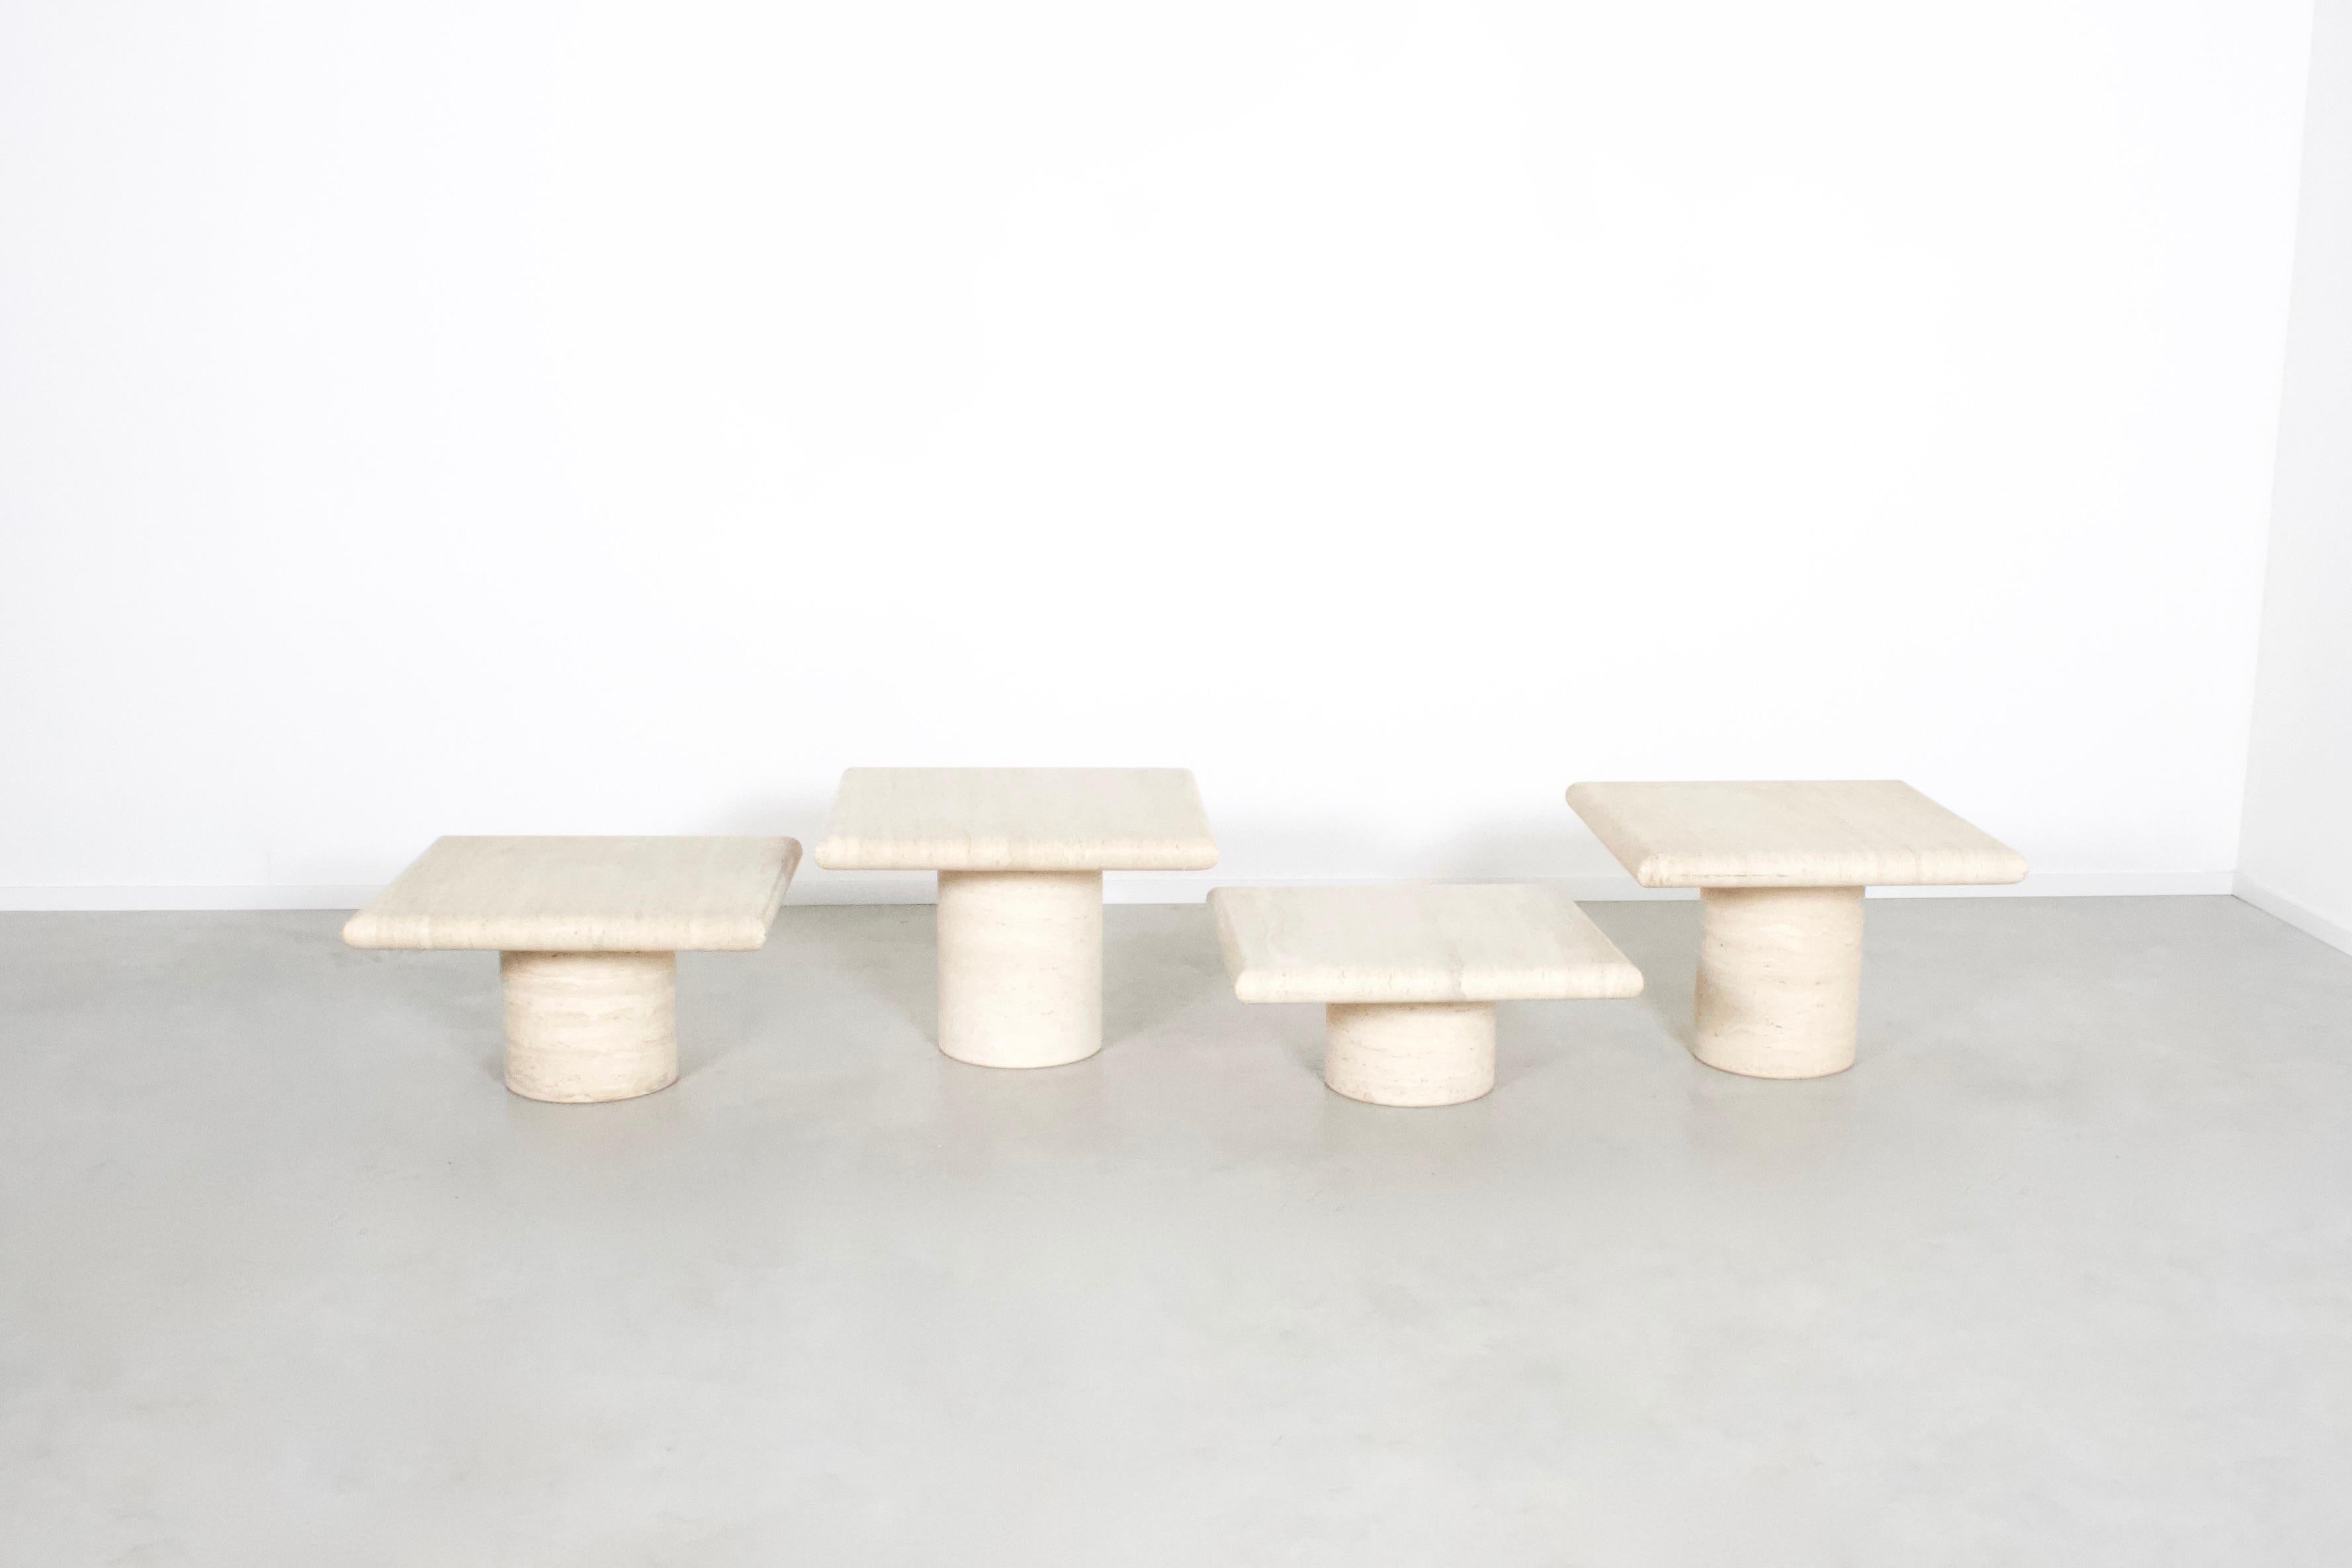 Set of four travertine tables in very good condition.

Manufactured by Up&Up in the 1970s in Italy.

The tables have a thick solid travertine top with rounded edges.

The bases of the tables are round and also made of travertine.

They have